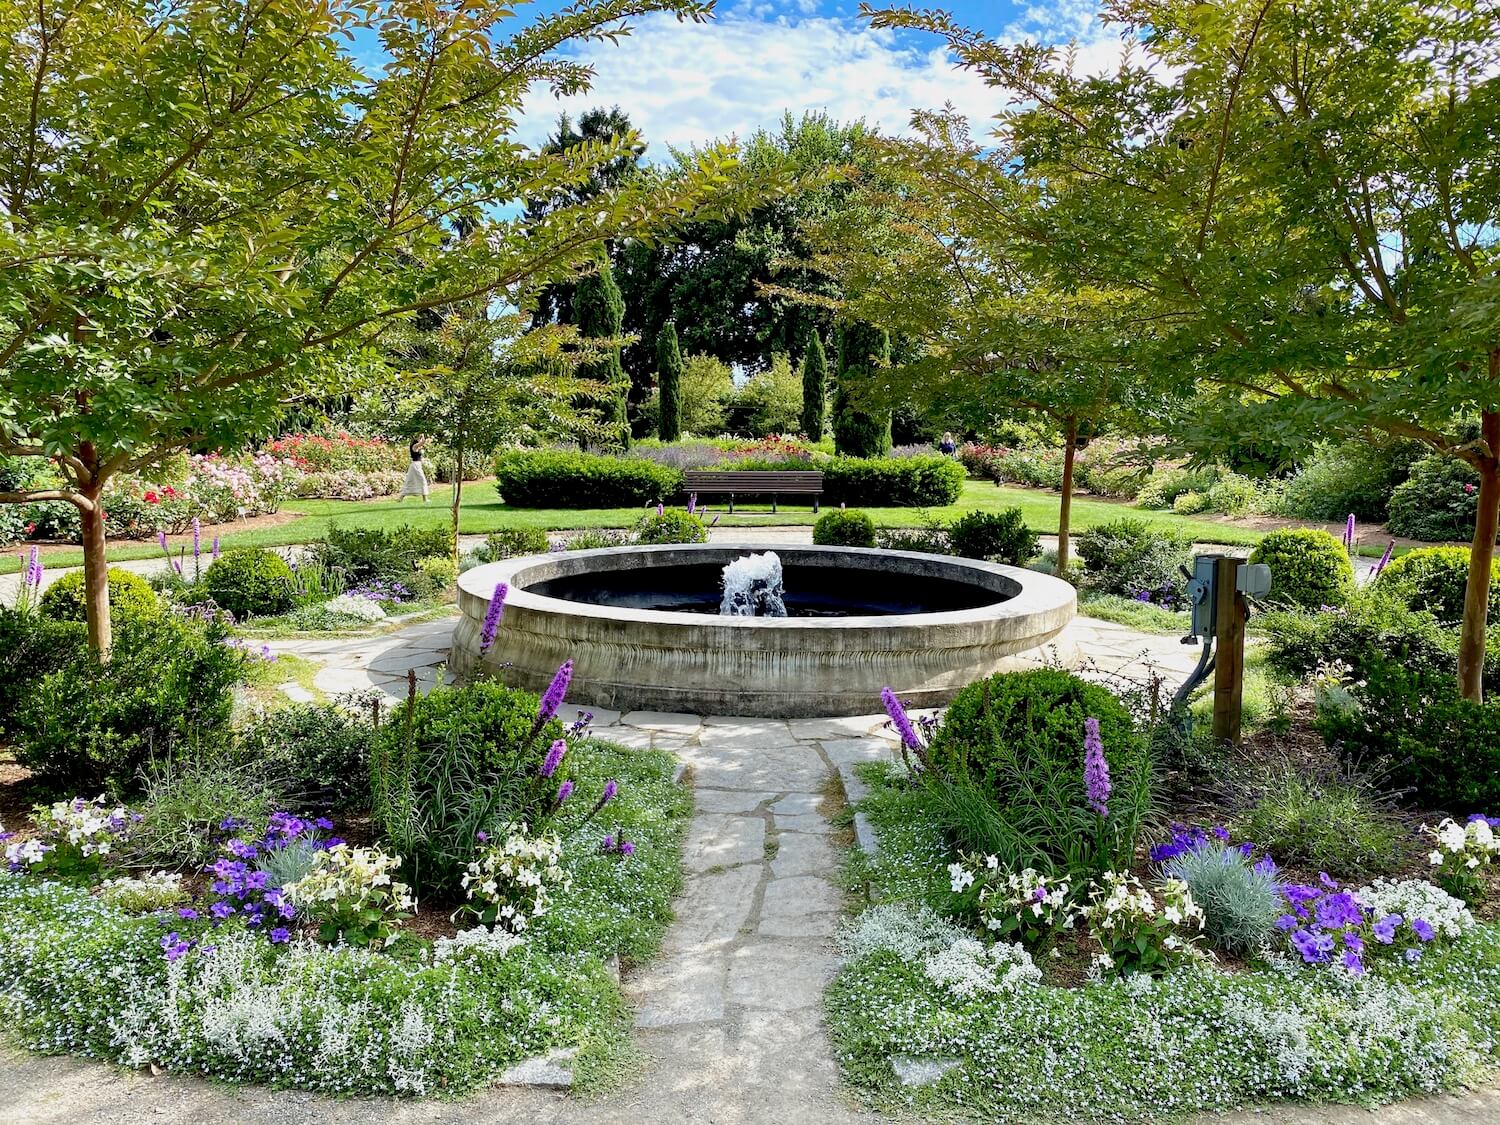 The bright array of colors in the Woodland Park Rose Garden shows summer is alive. Fronds of purple flowers are mixed with more delicate low level white ground covers while cherry trees frame in a circular pond with a fountain bubbling water. In the background are more green shrubs under blue sky.